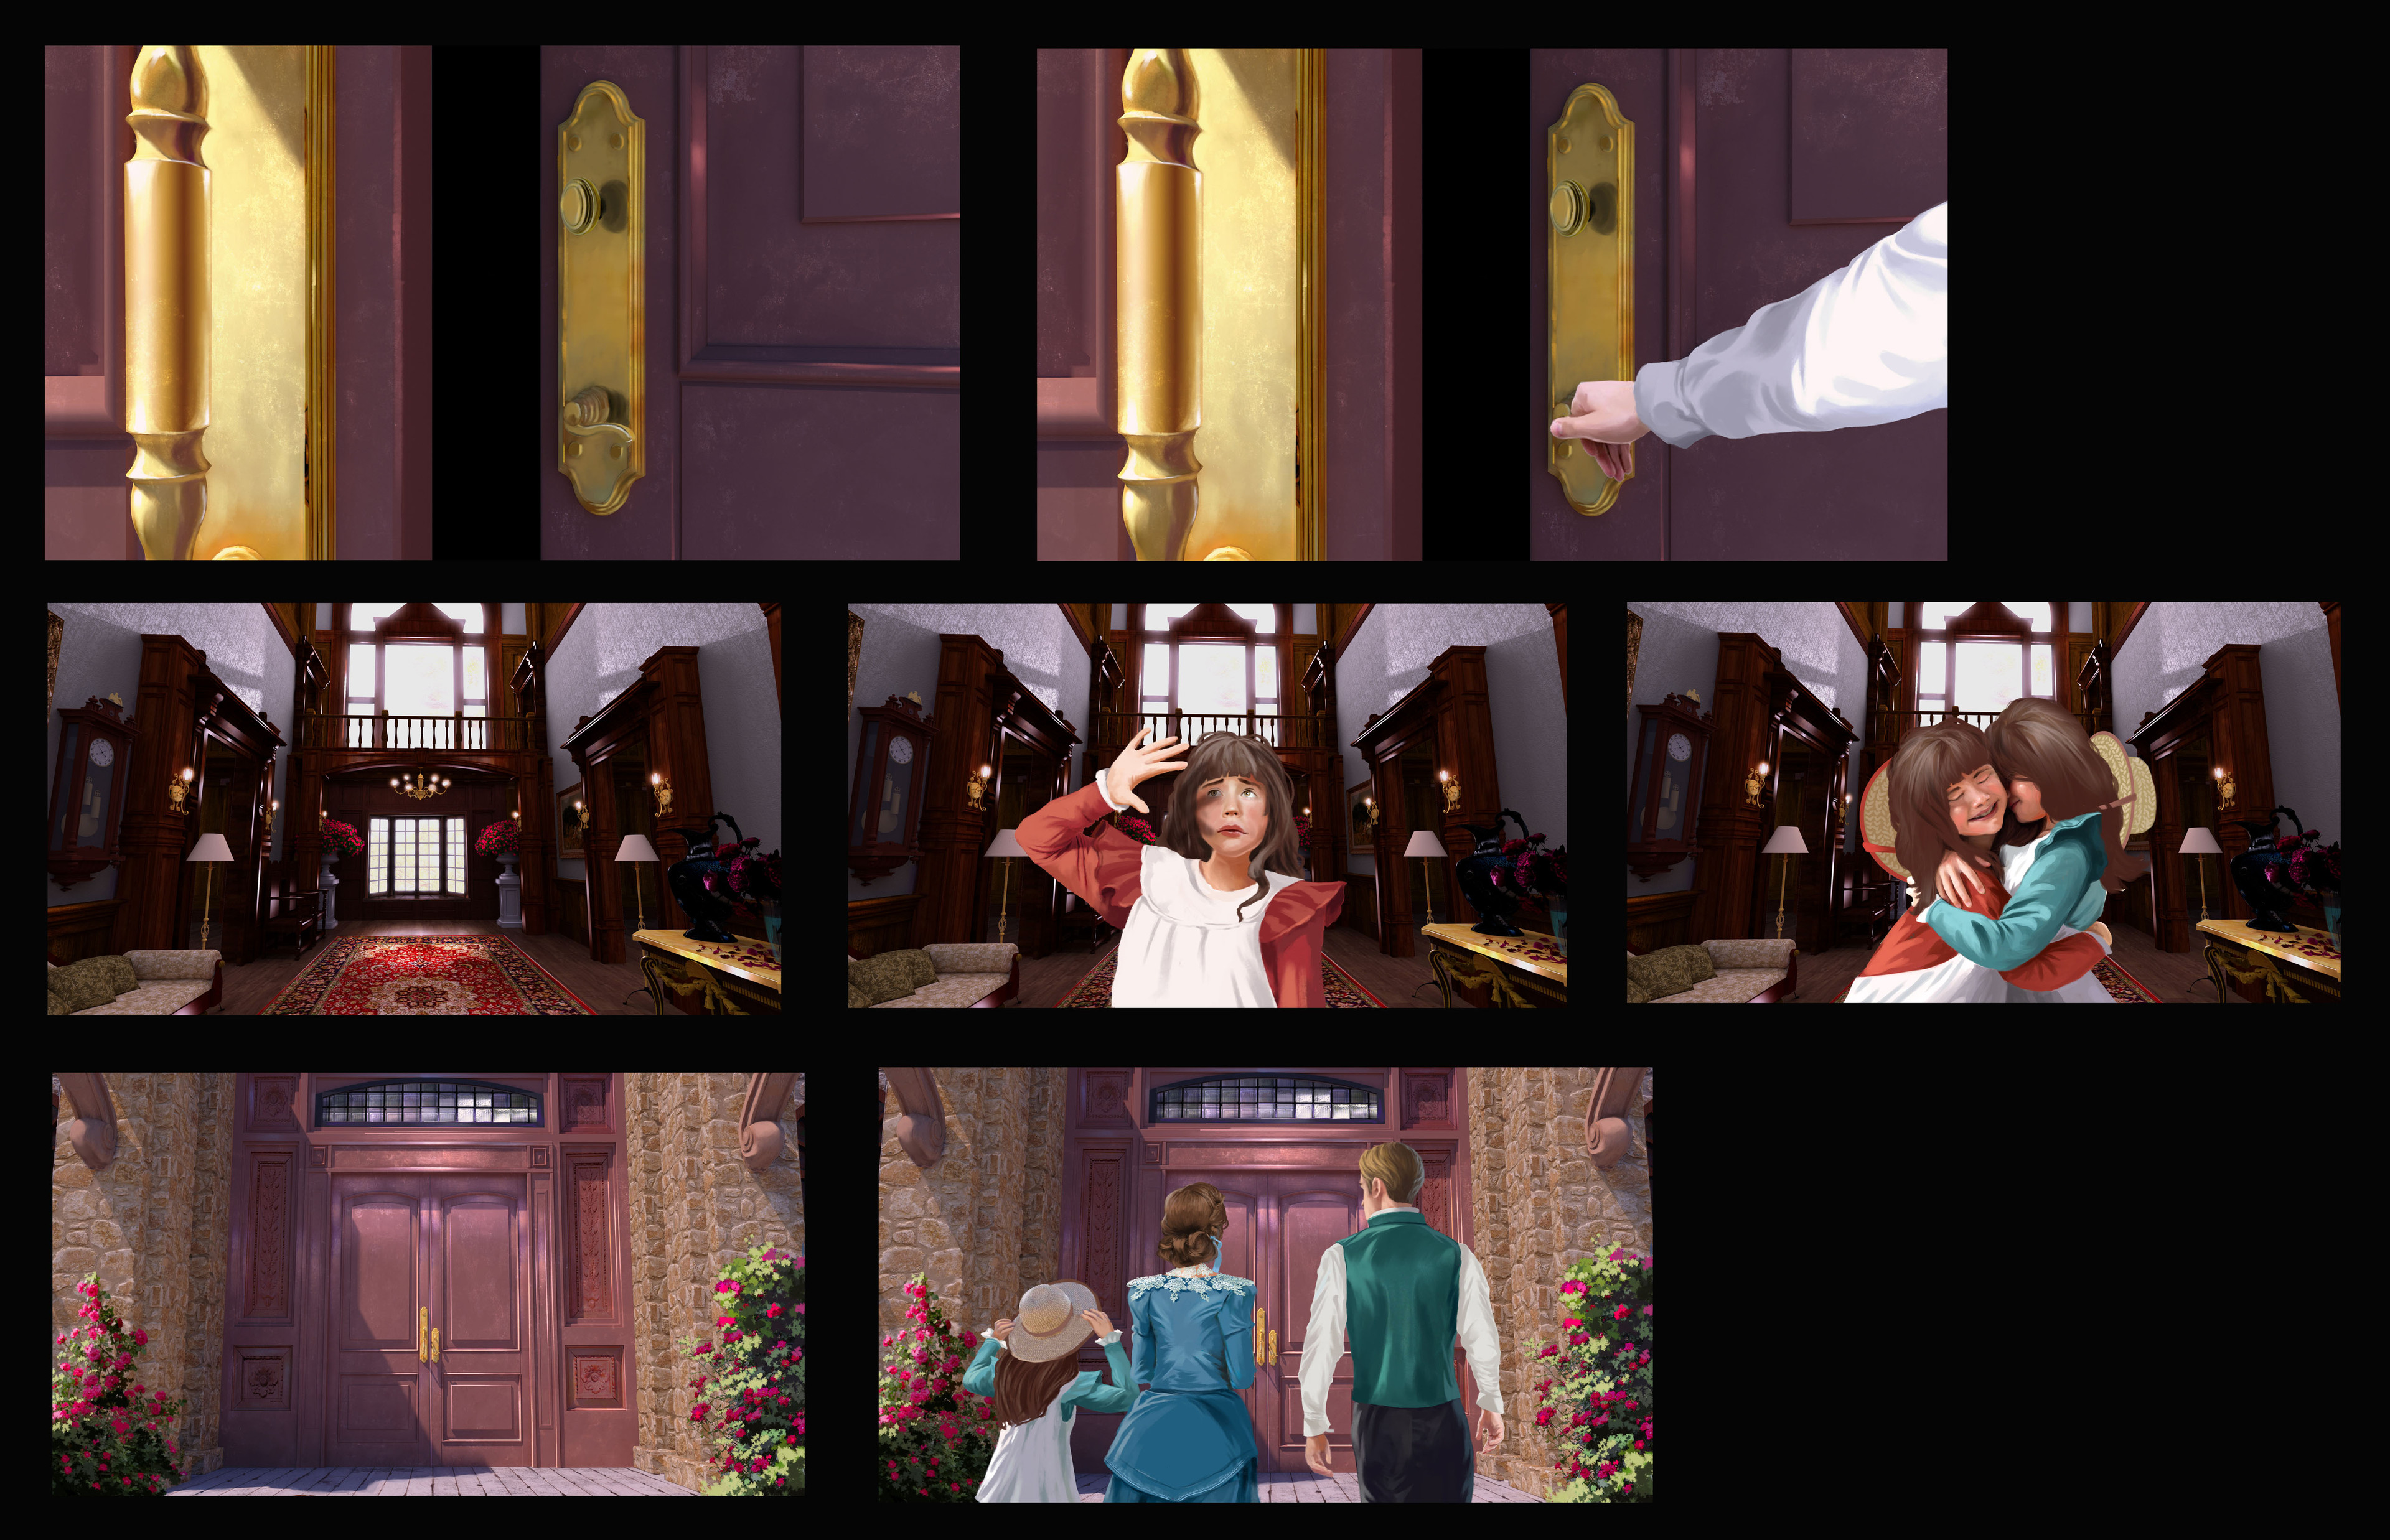 Initial image sequences for in-game animation